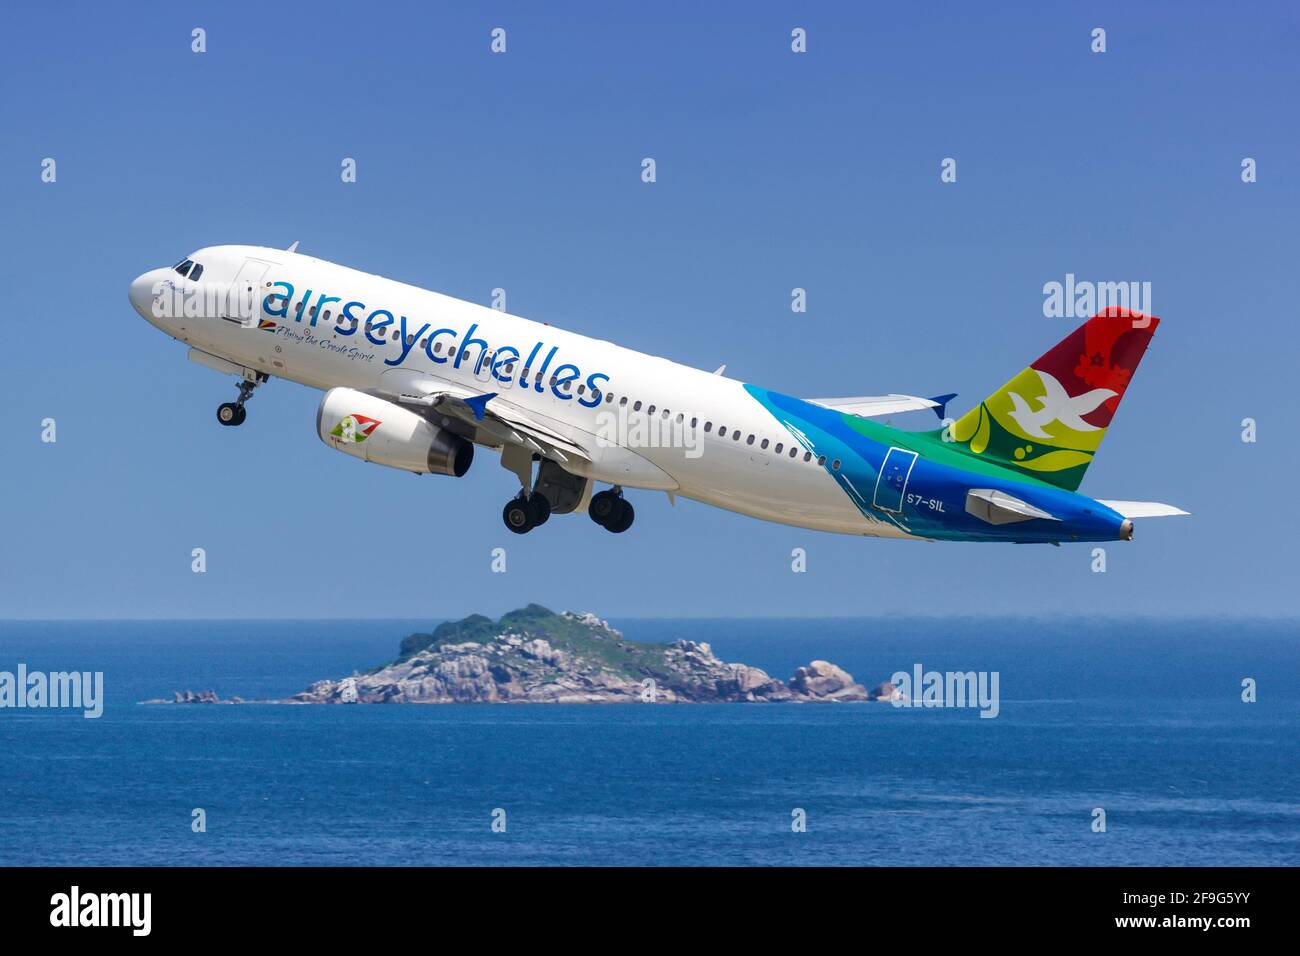 Mahe, Seychelles - November 24, 2017: Air Seychelles Airbus A320 airplane at Seychelles International Airport  (SEZ) in the Seychelles. Airbus is a Eu Stock Photo